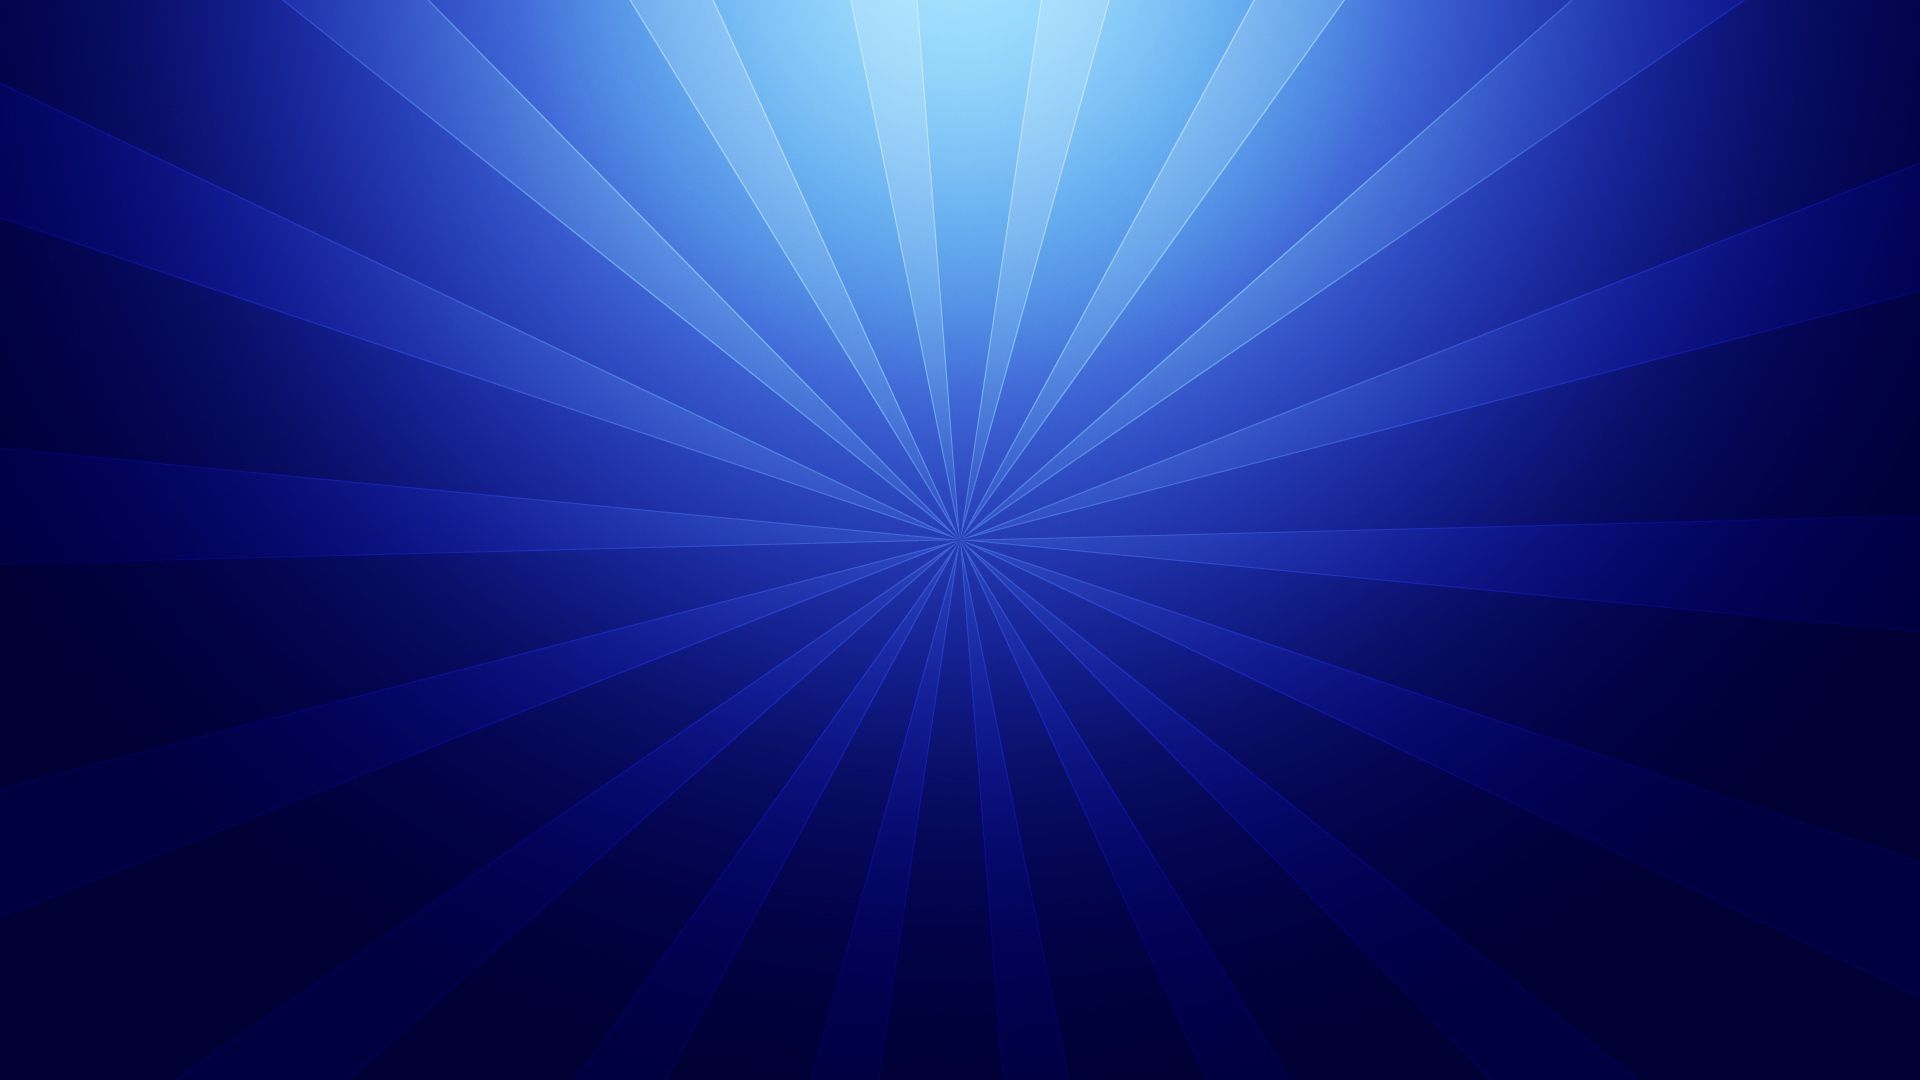 Download Wallpaper 1920x1080 Abstract, Blue, Rays, Line, Creative